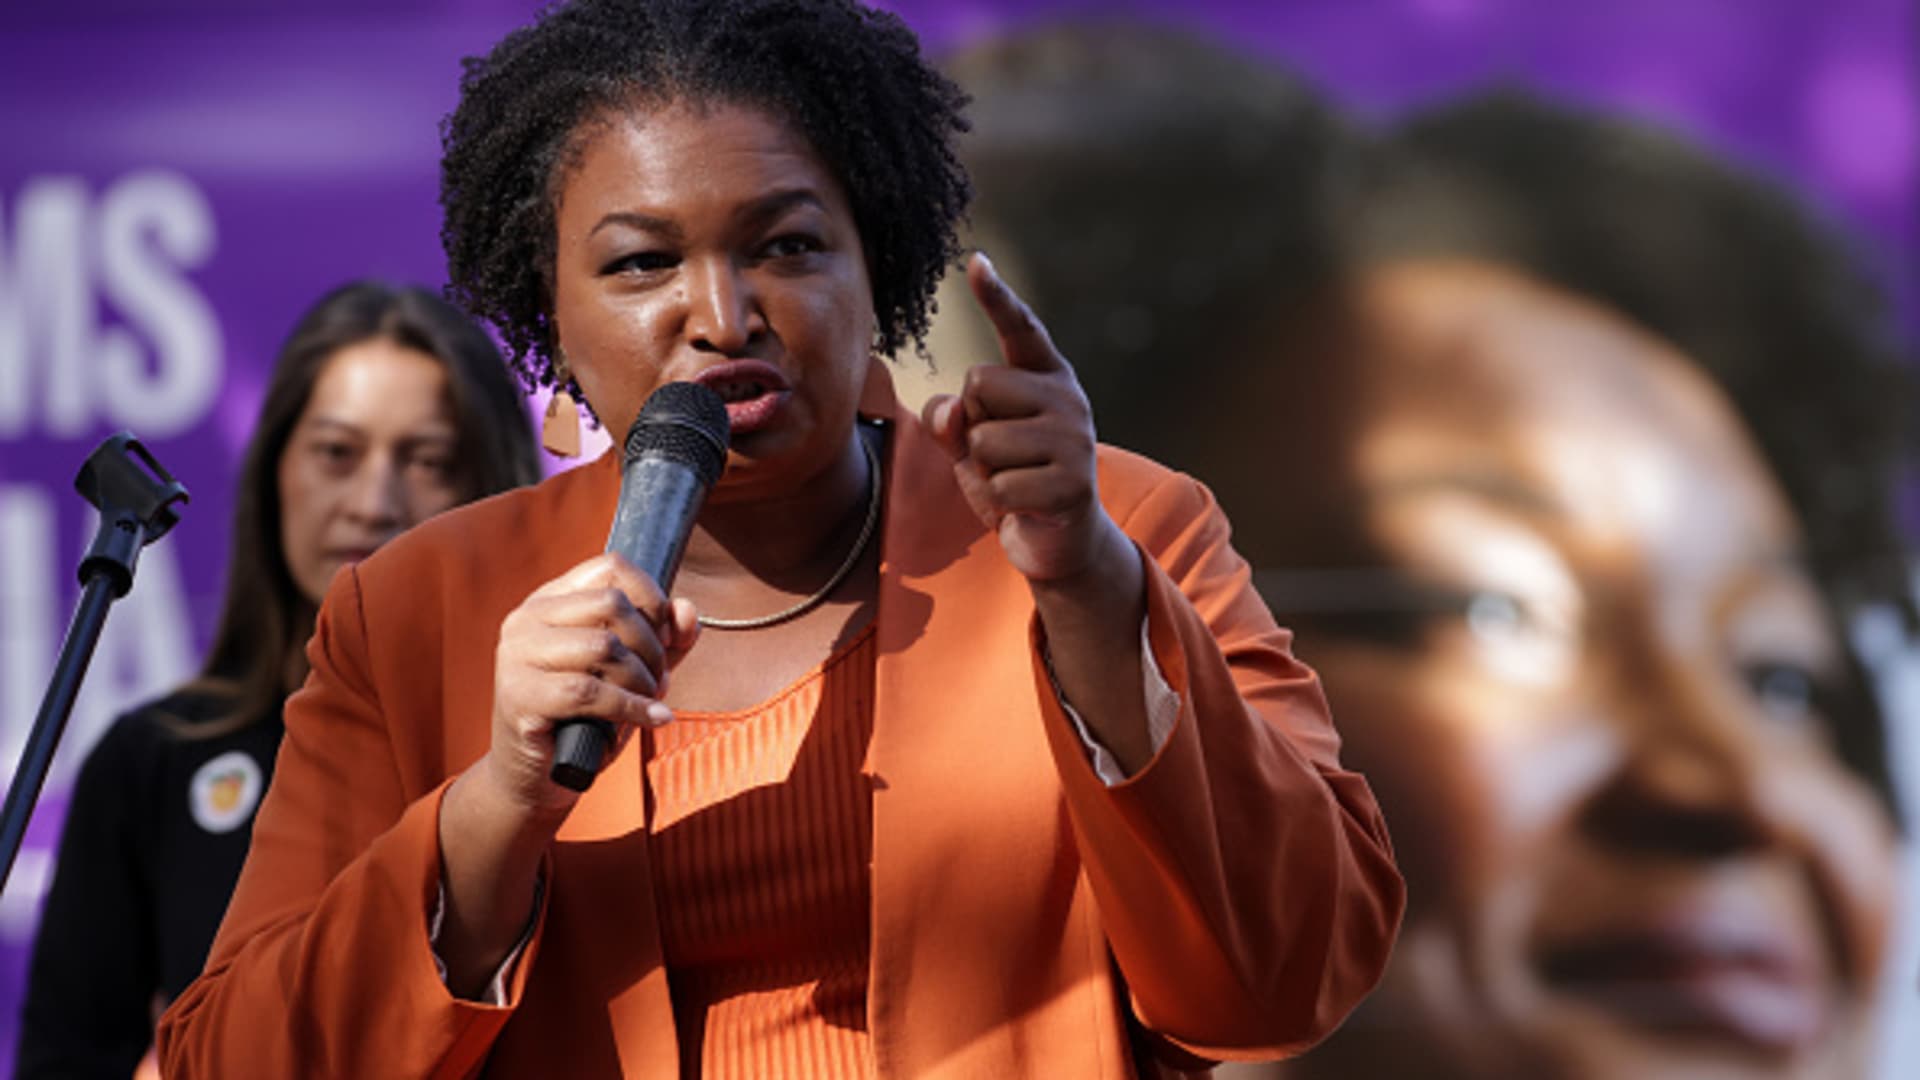 Democratic Georgia gubernatorial candidate Stacey Abrams speaks to supporters during a stop of her statewide campaign bus tour on November 5, 2022 in Savannah, Georgia.